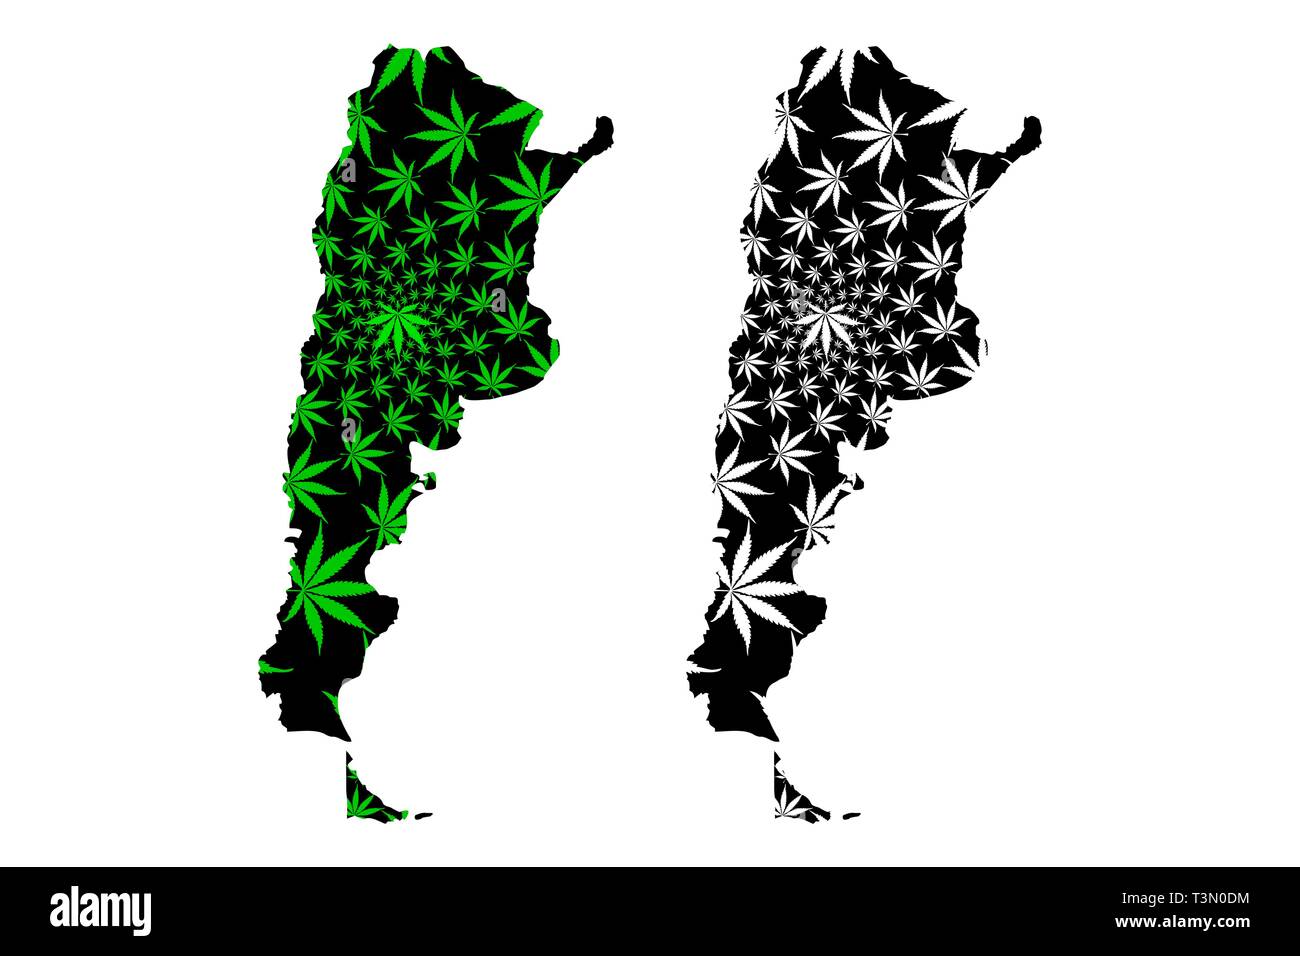 Argentina - map is designed cannabis leaf green and black,  Federative Argentine Republic map made of marijuana (marihuana,THC) foliage, Stock Vector